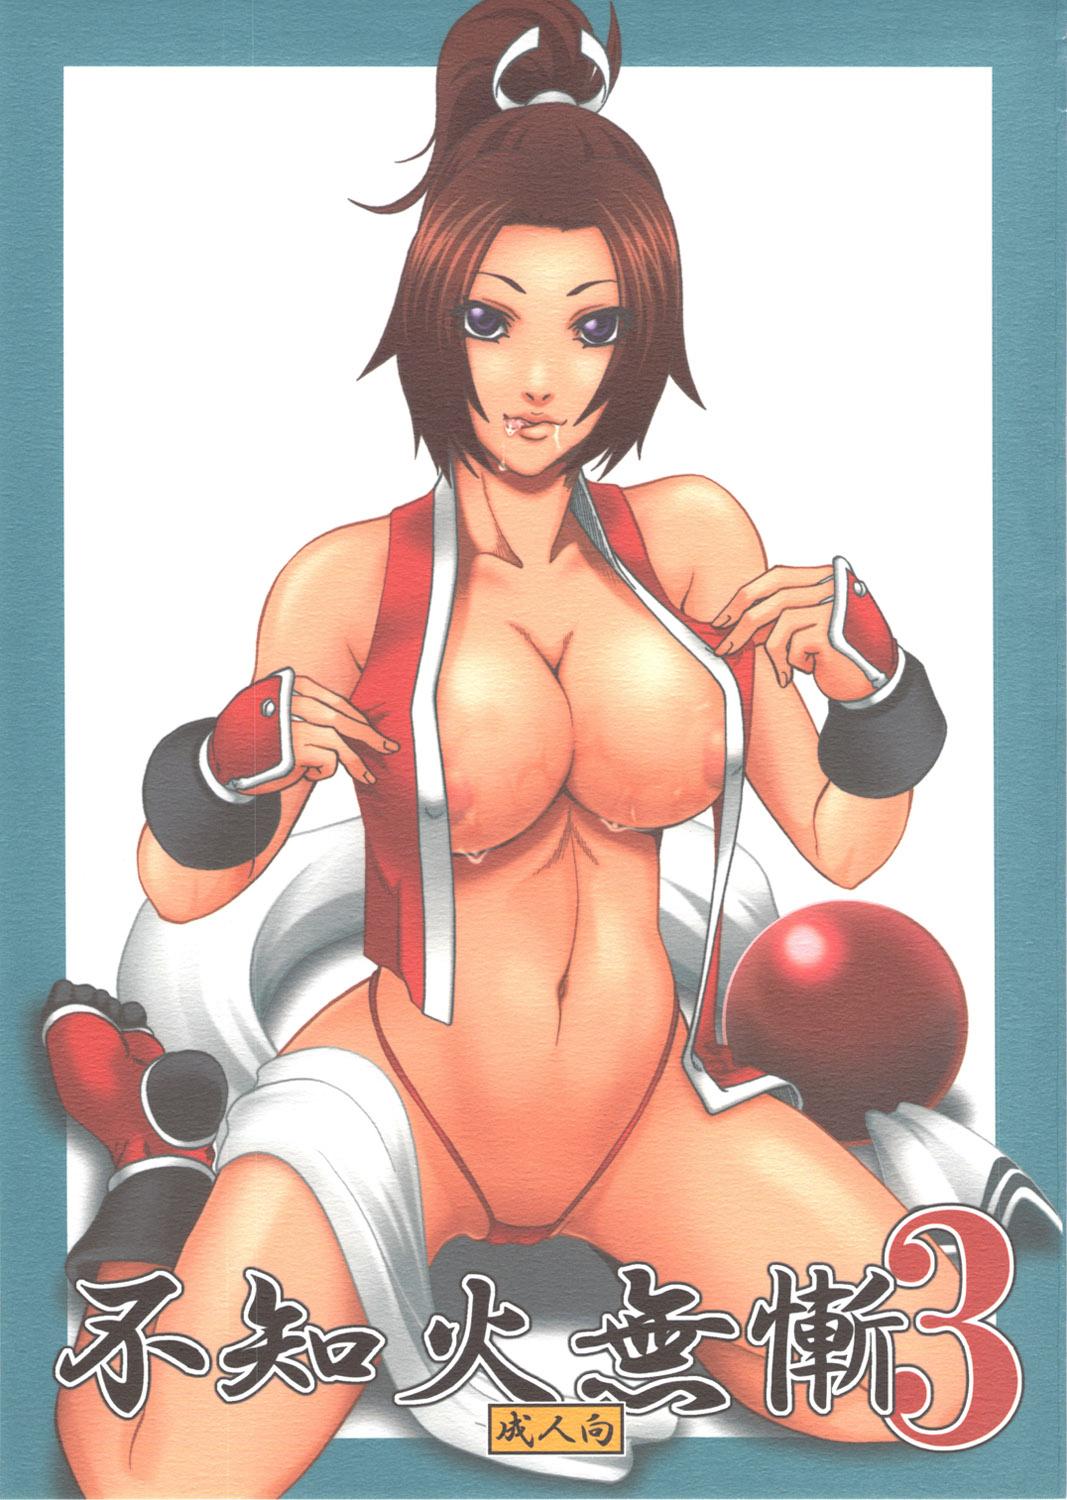 Hot Naked Women Shiranui Muzan 3 - King of fighters Perrito - Picture 1